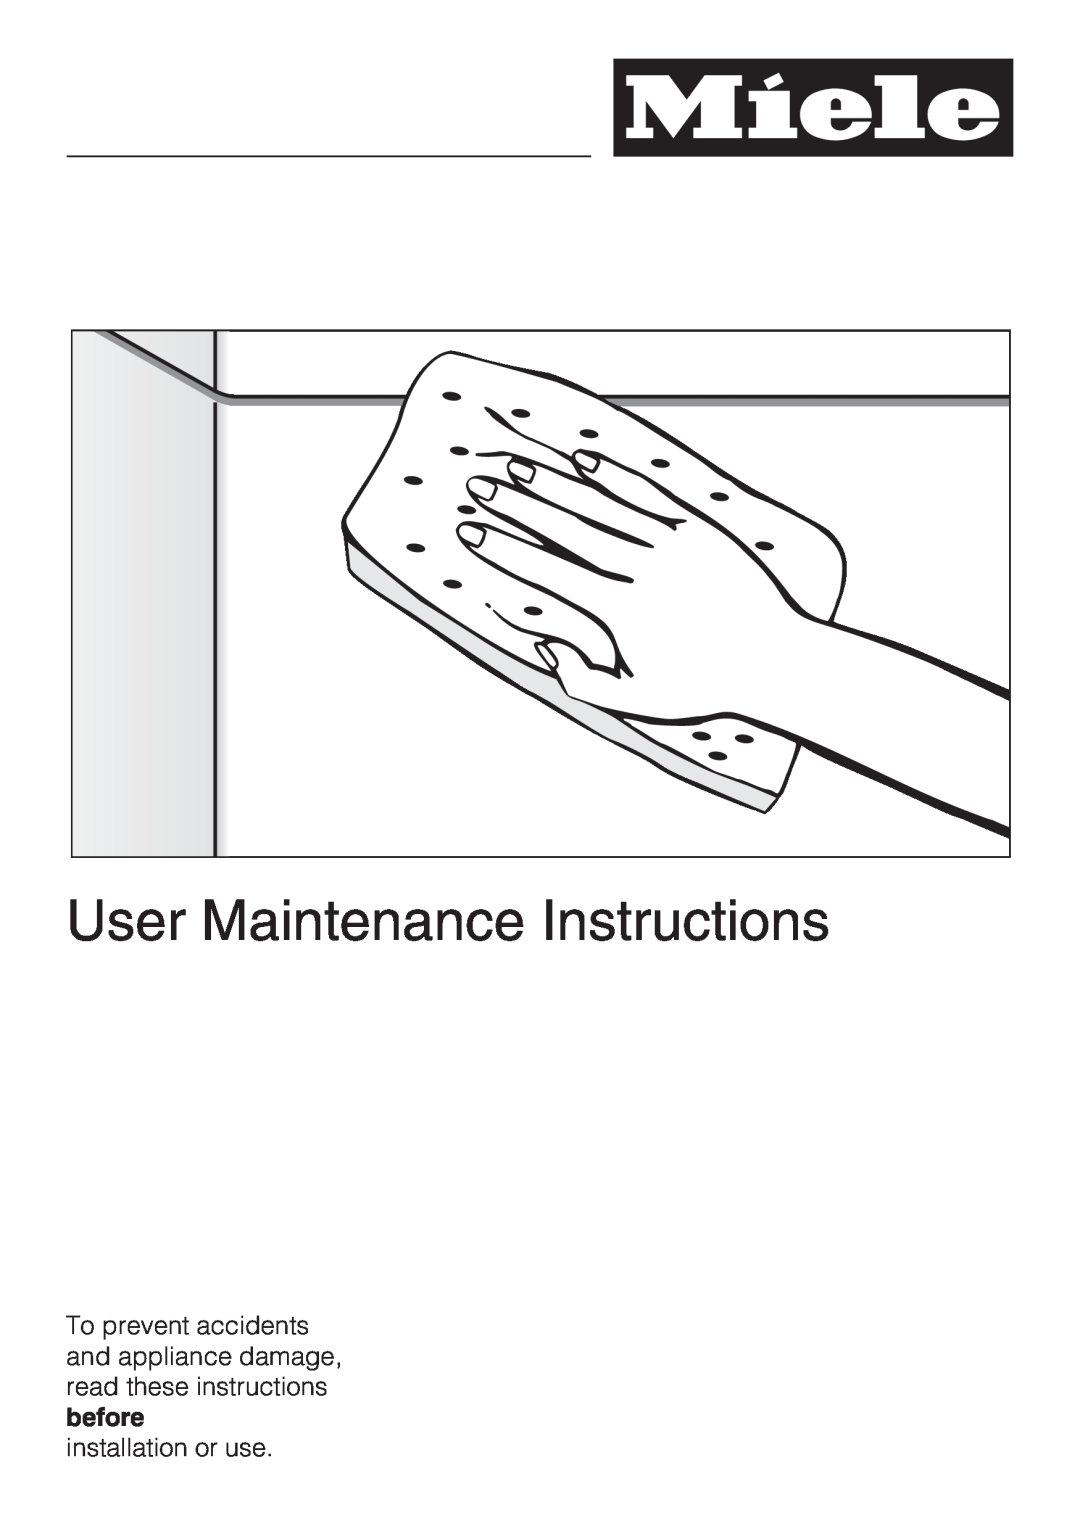 Miele G 5770, G 5775 manual User Maintenance Instructions, installation or use 